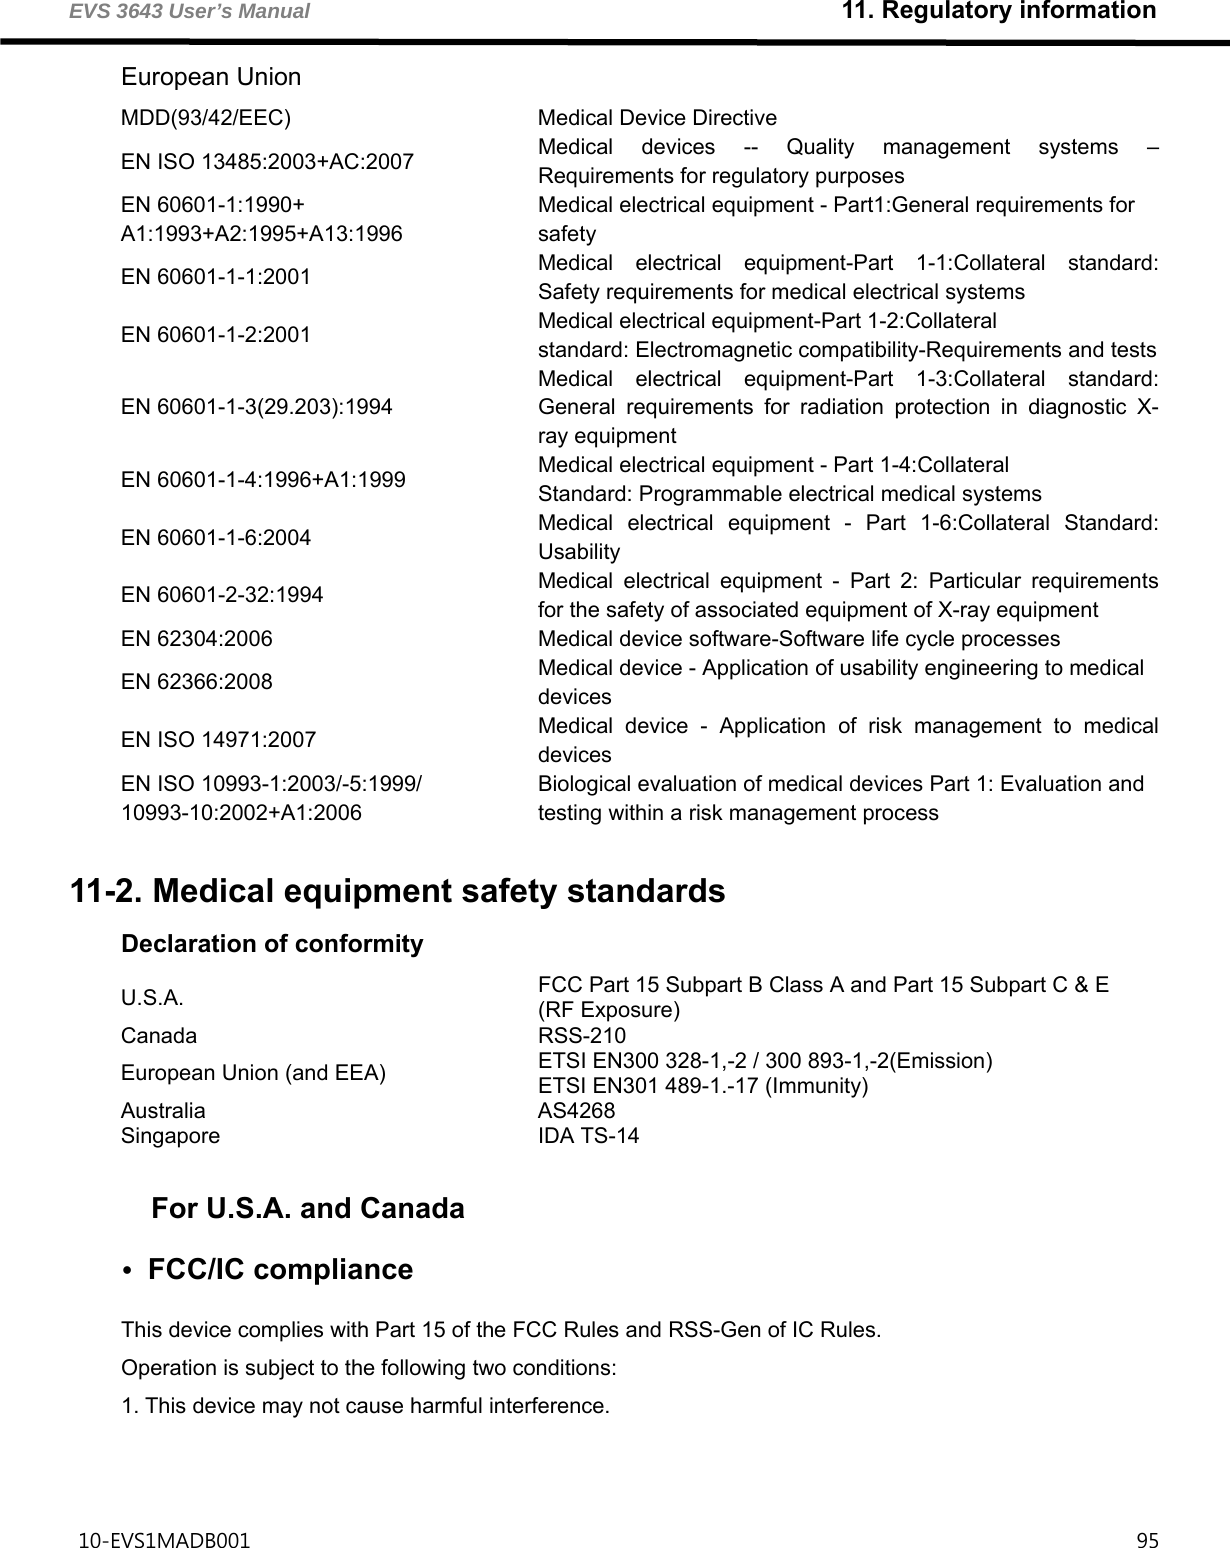 EVS 3643 User’s Manual                                                   11. Regulatory information 10-EVS1MADB001                                                                                     95  European Union MDD(93/42/EEC)  Medical Device Directive EN ISO 13485:2003+AC:2007  Medical devices -- Quality management systems – Requirements for regulatory purposes EN 60601-1:1990+ A1:1993+A2:1995+A13:1996 Medical electrical equipment - Part1:General requirements for safety EN 60601-1-1:2001  Medical electrical equipment-Part 1-1:Collateral standard: Safety requirements for medical electrical systems EN 60601-1-2:2001  Medical electrical equipment-Part 1-2:Collateral standard: Electromagnetic compatibility-Requirements and testsEN 60601-1-3(29.203):1994 Medical electrical equipment-Part 1-3:Collateral standard: General requirements for radiation protection in diagnostic X-ray equipment EN 60601-1-4:1996+A1:1999  Medical electrical equipment - Part 1-4:Collateral Standard: Programmable electrical medical systems EN 60601-1-6:2004  Medical electrical equipment - Part 1-6:Collateral Standard: Usability EN 60601-2-32:1994  Medical electrical equipment - Part 2: Particular requirements for the safety of associated equipment of X-ray equipment EN 62304:2006  Medical device software-Software life cycle processes EN 62366:2008  Medical device - Application of usability engineering to medical devices EN ISO 14971:2007  Medical device - Application of risk management to medical devices EN ISO 10993-1:2003/-5:1999/ 10993-10:2002+A1:2006 Biological evaluation of medical devices Part 1: Evaluation and testing within a risk management process  11-2. Medical equipment safety standards Declaration of conformity U.S.A.  FCC Part 15 Subpart B Class A and Part 15 Subpart C &amp; E (RF Exposure) Canada RSS-210 European Union (and EEA)  ETSI EN300 328-1,-2 / 300 893-1,-2(Emission) ETSI EN301 489-1.-17 (Immunity) Australia AS4268 Singapore IDA TS-14   For U.S.A. and Canada • FCC/IC compliance This device complies with Part 15 of the FCC Rules and RSS-Gen of IC Rules. Operation is subject to the following two conditions: 1. This device may not cause harmful interference.   